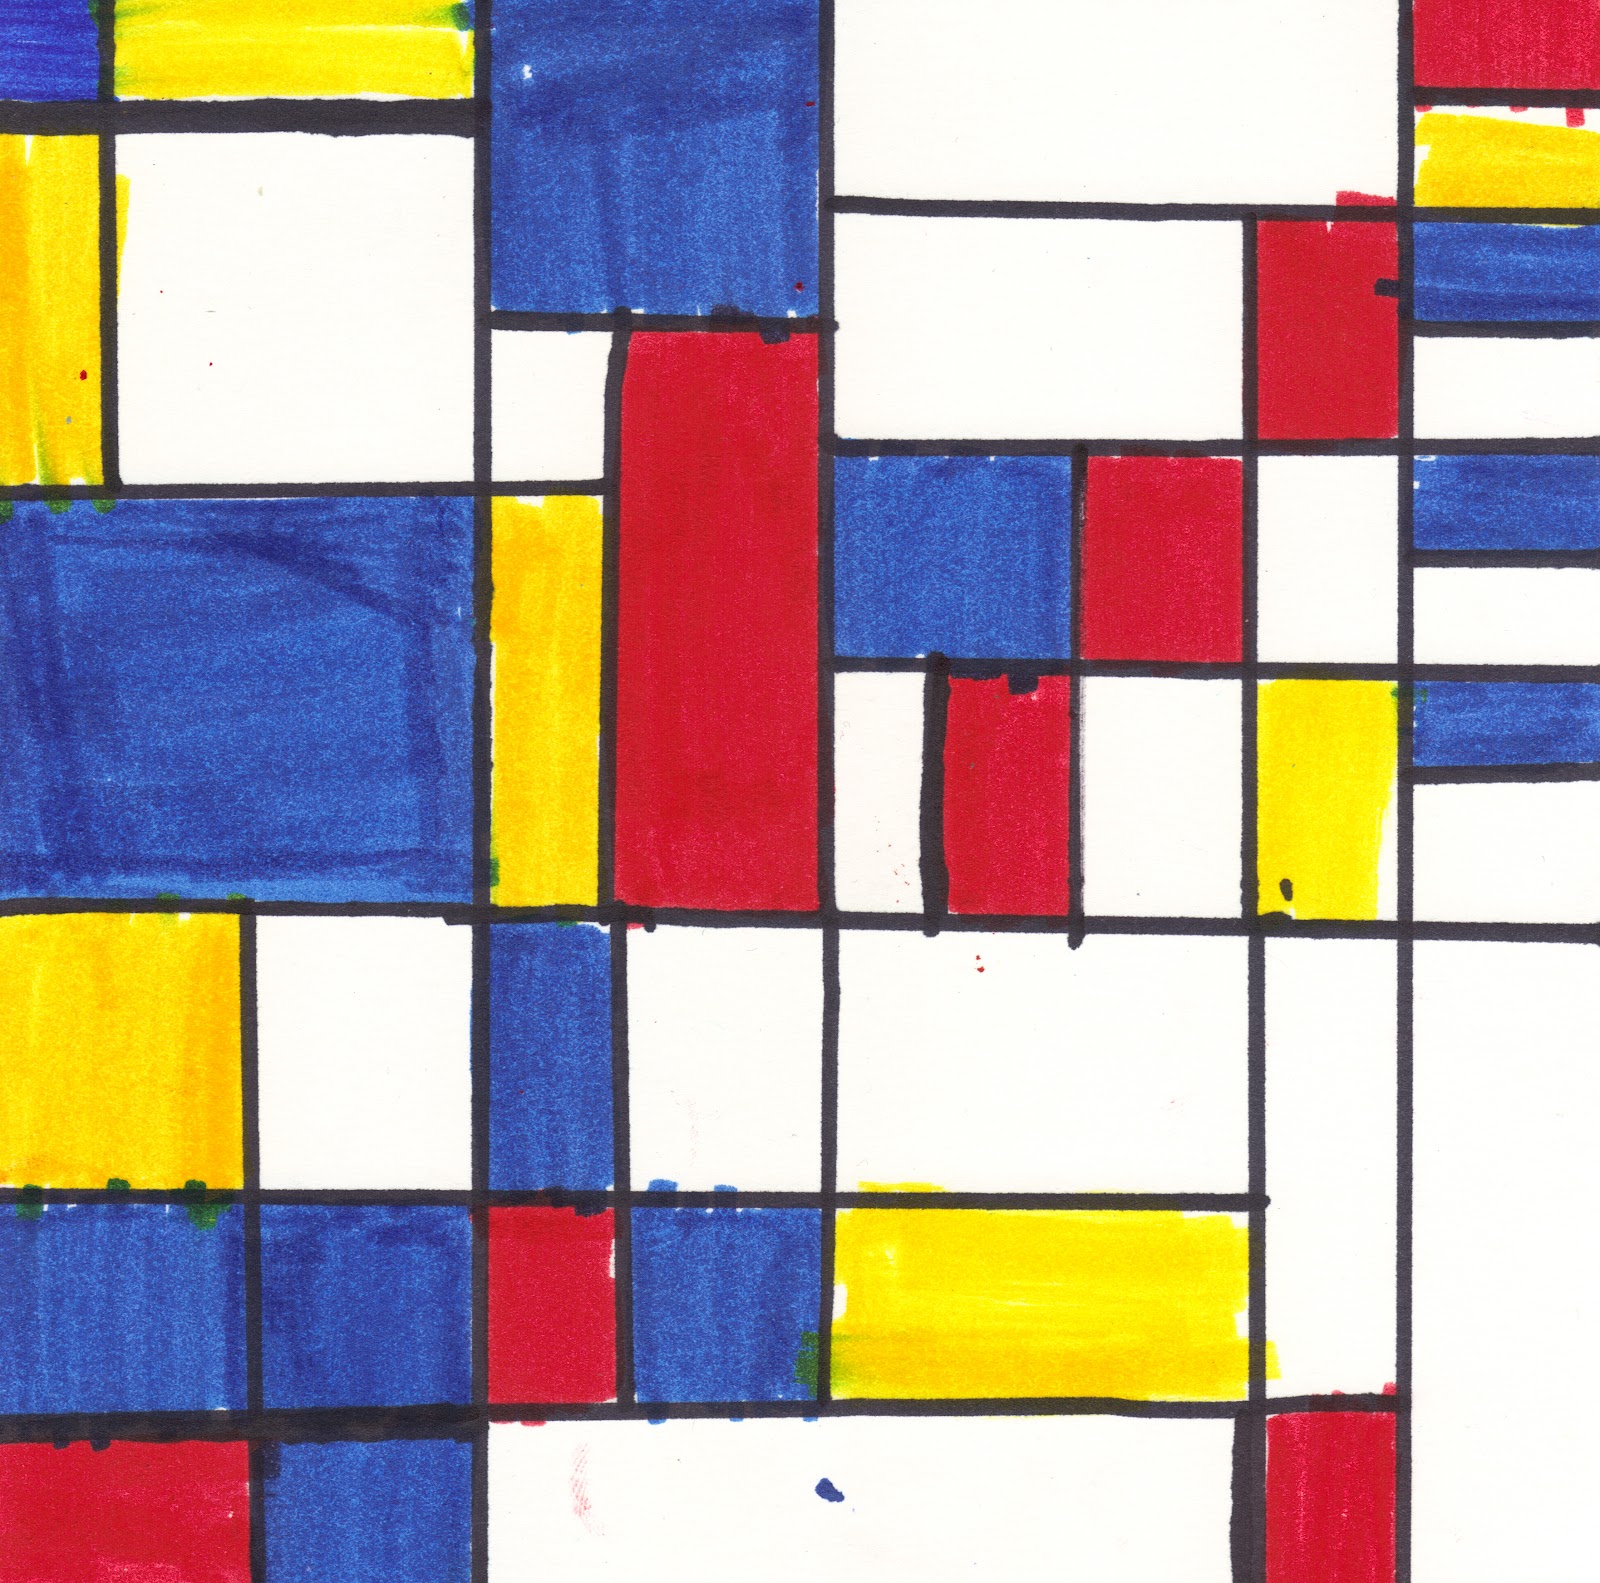 M and J in a Nutshell: FREE ART RESOURCES - Piet Mondrian